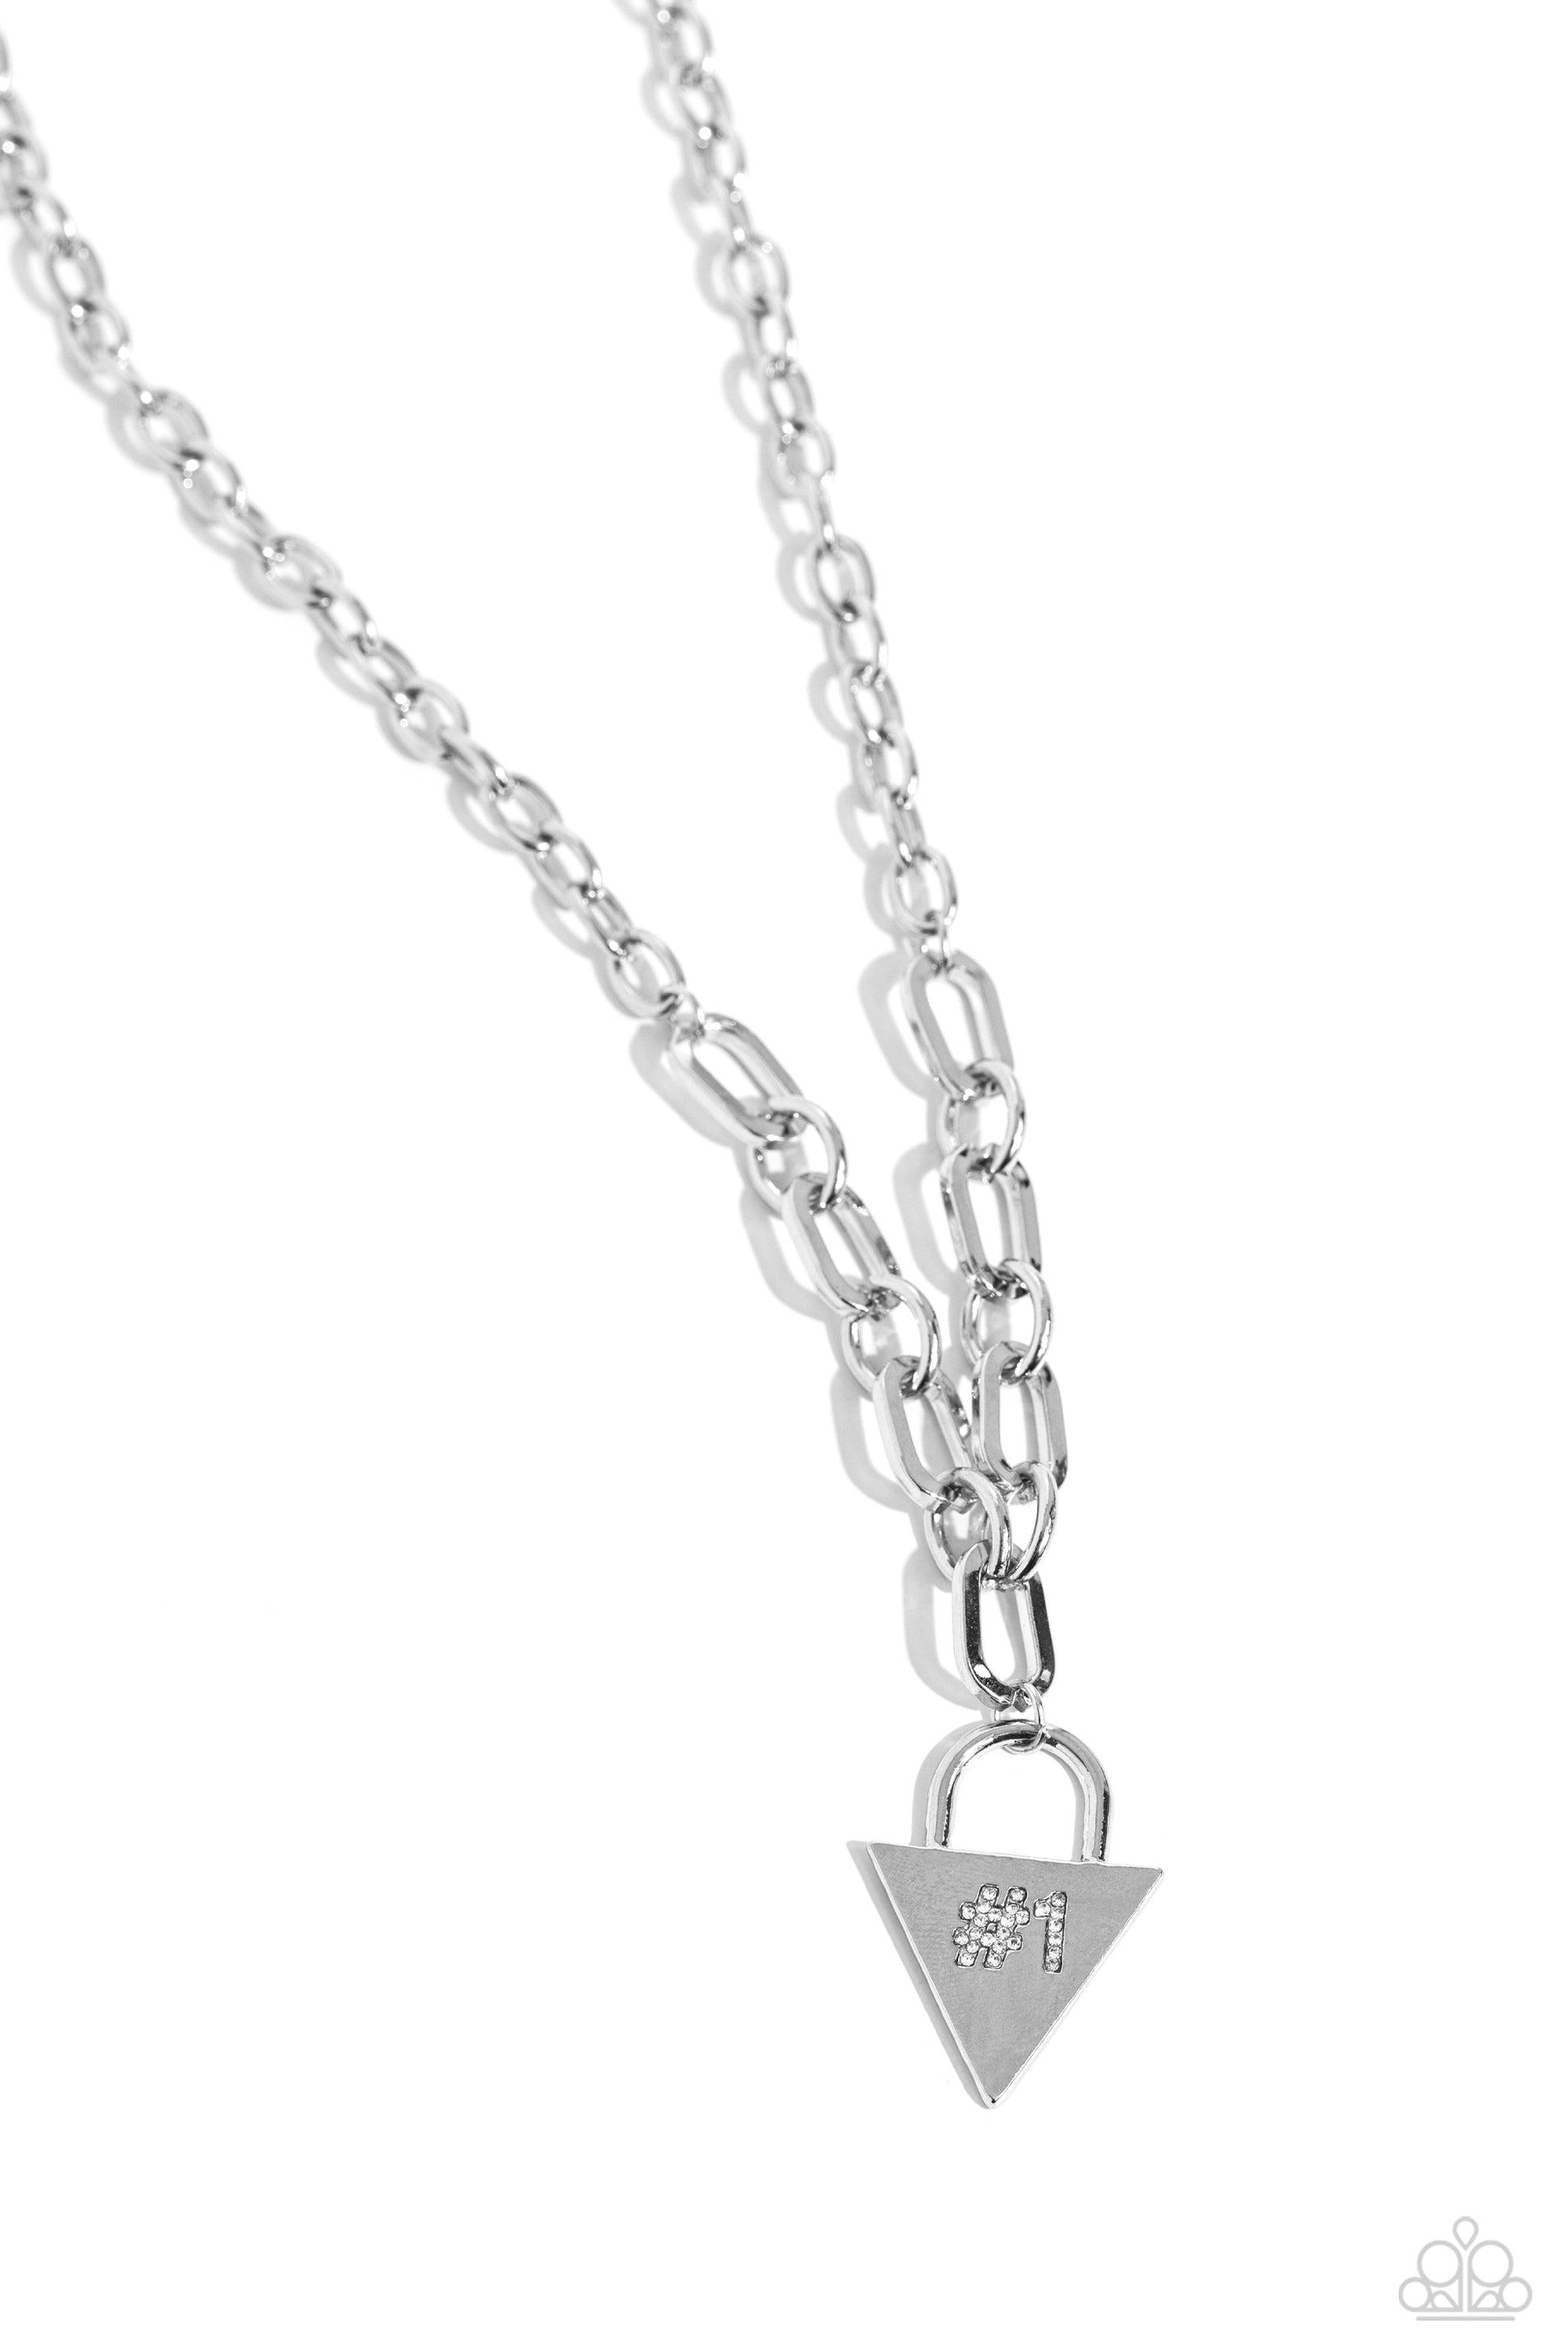 Paparazzi Accessories - Your Number One Follower - White Rhinestones Necklaces dangling from a collection of oversized, curved links connected to a silver link chain, a locket-inspired pendant rests in the shape of a triangle. Embossed in white rhinestones, a #1 gleams from the center of the pendant for a sports-inspired finish. Features an adjustable clasp closure.  Sold as one individual necklace. Includes one pair of matching earrings.